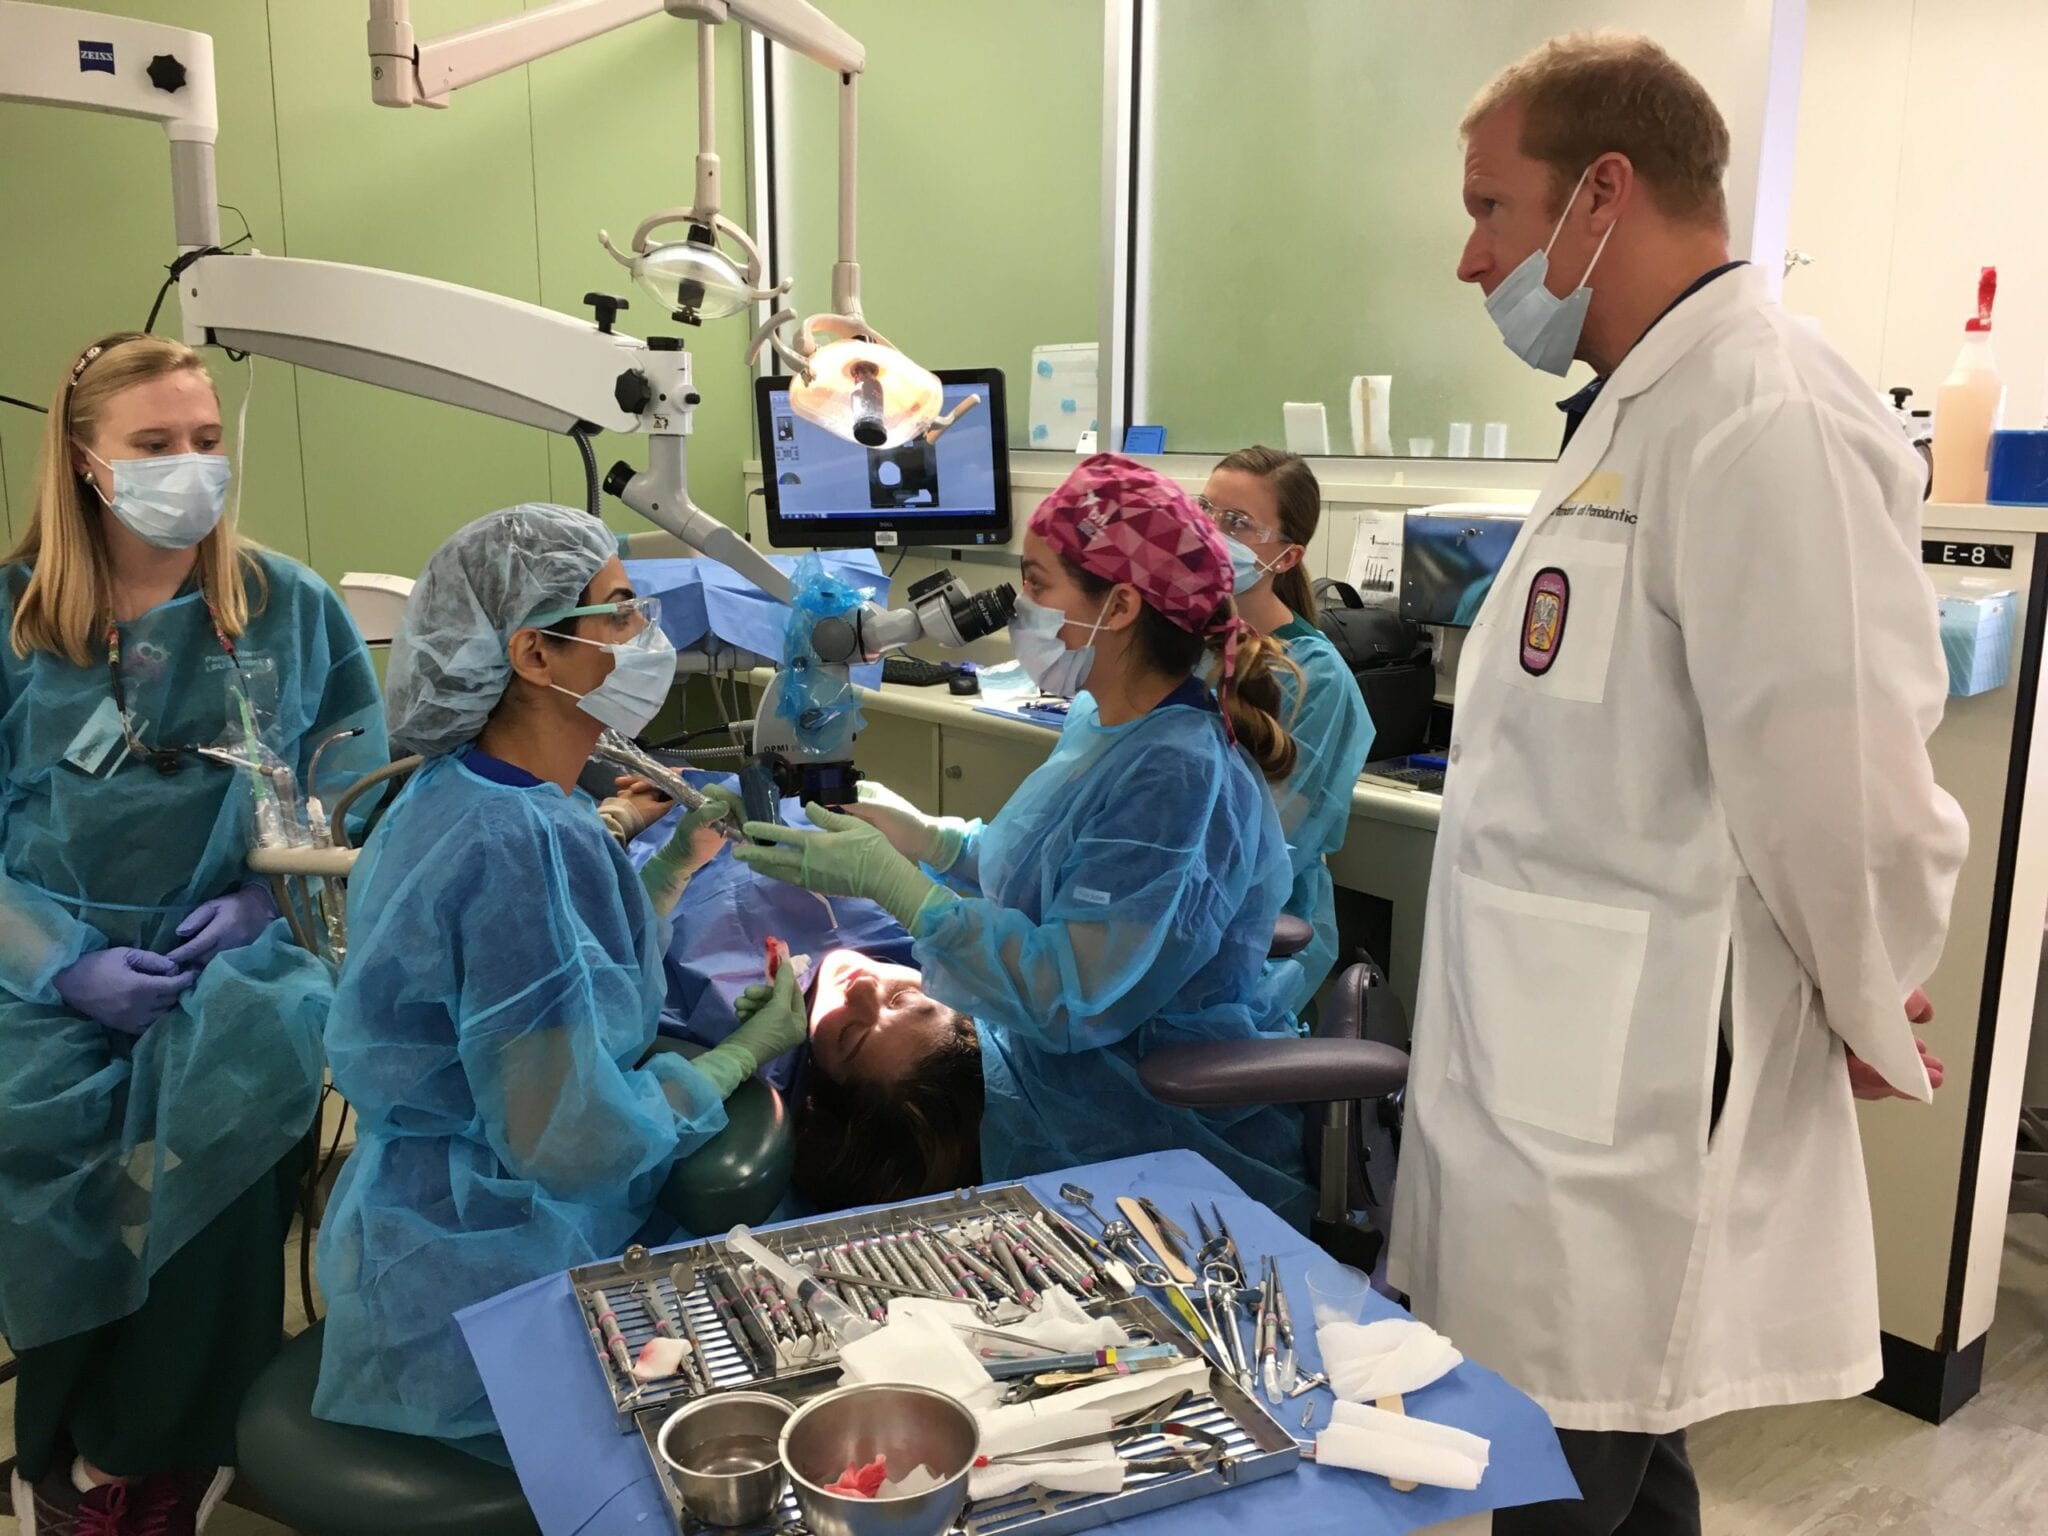 Dr. Cross Overseeing an Operation